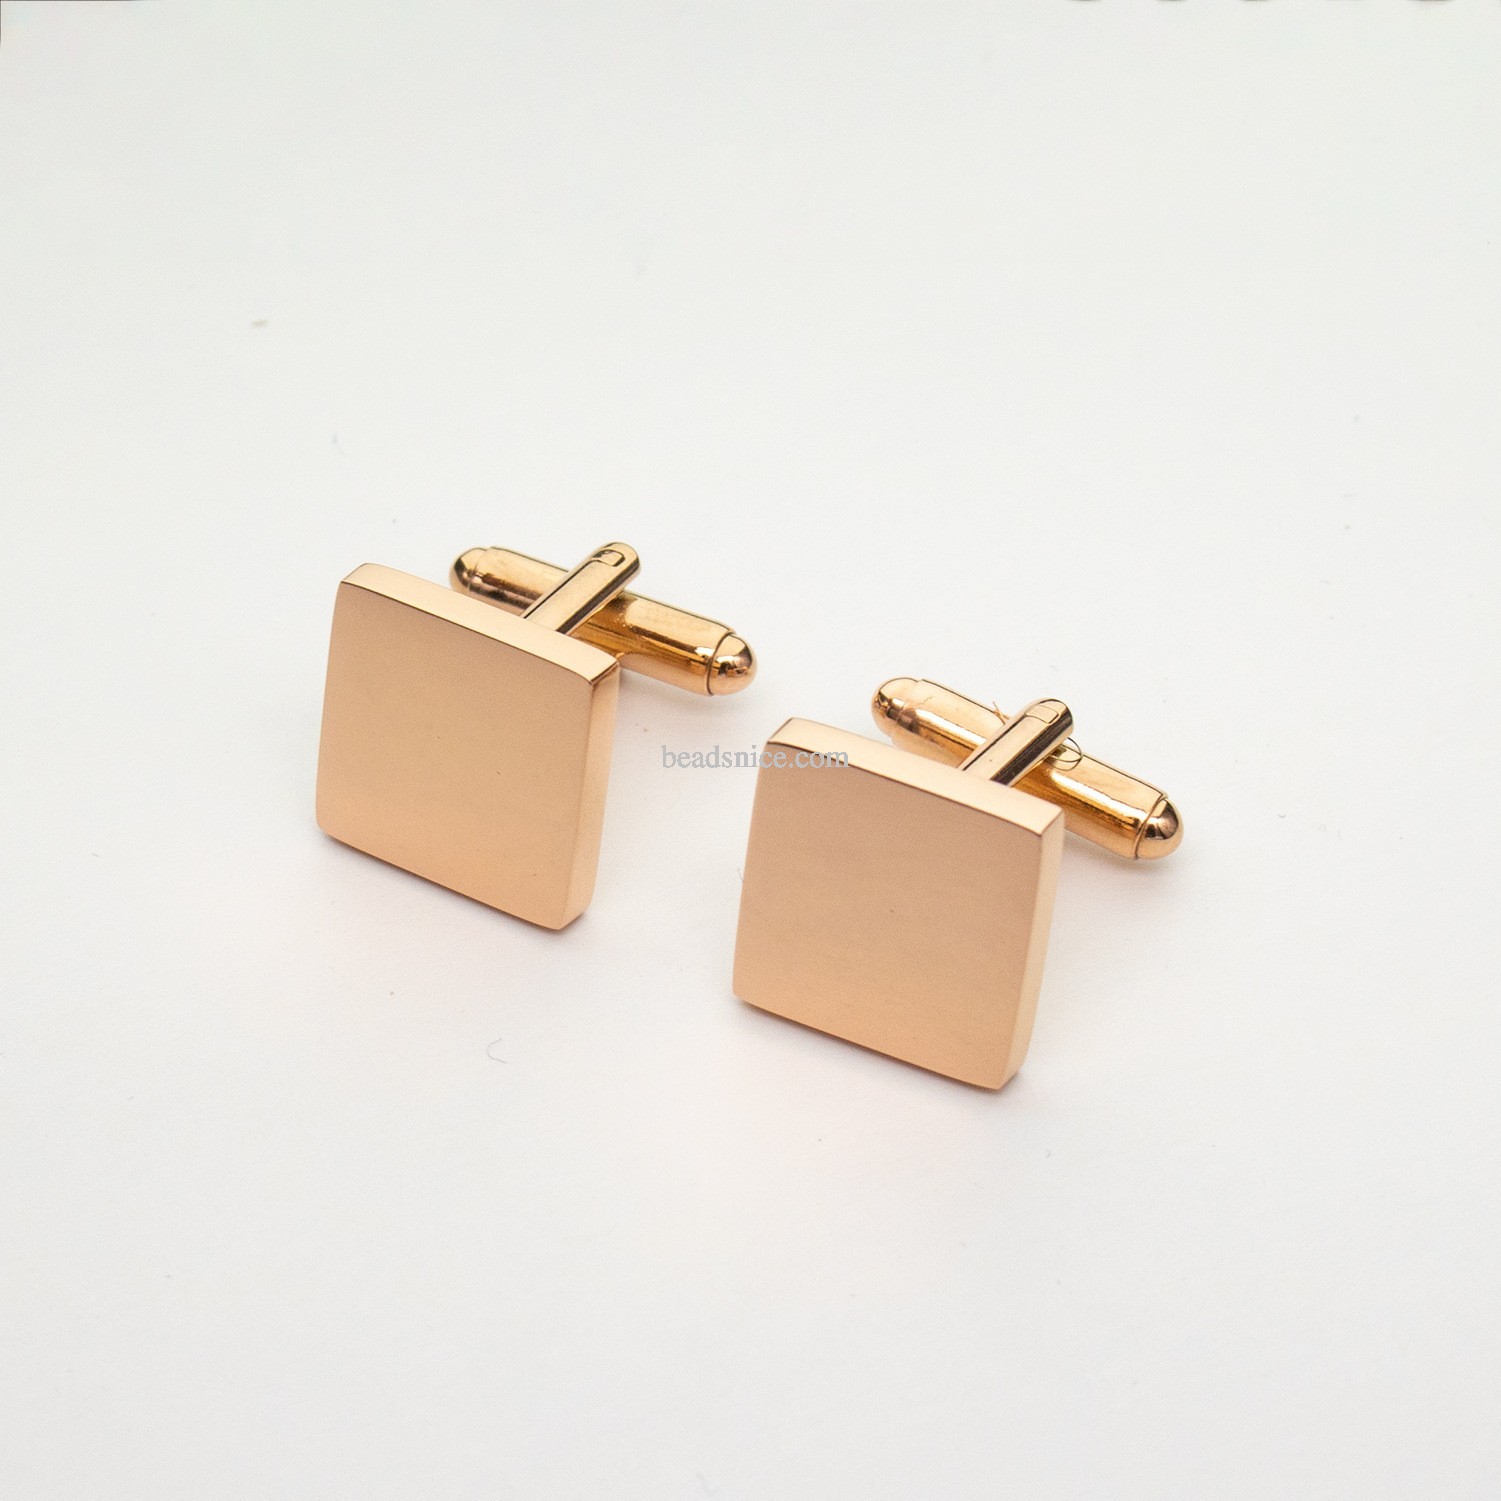 Stainless Steel Cufflink Square Blank